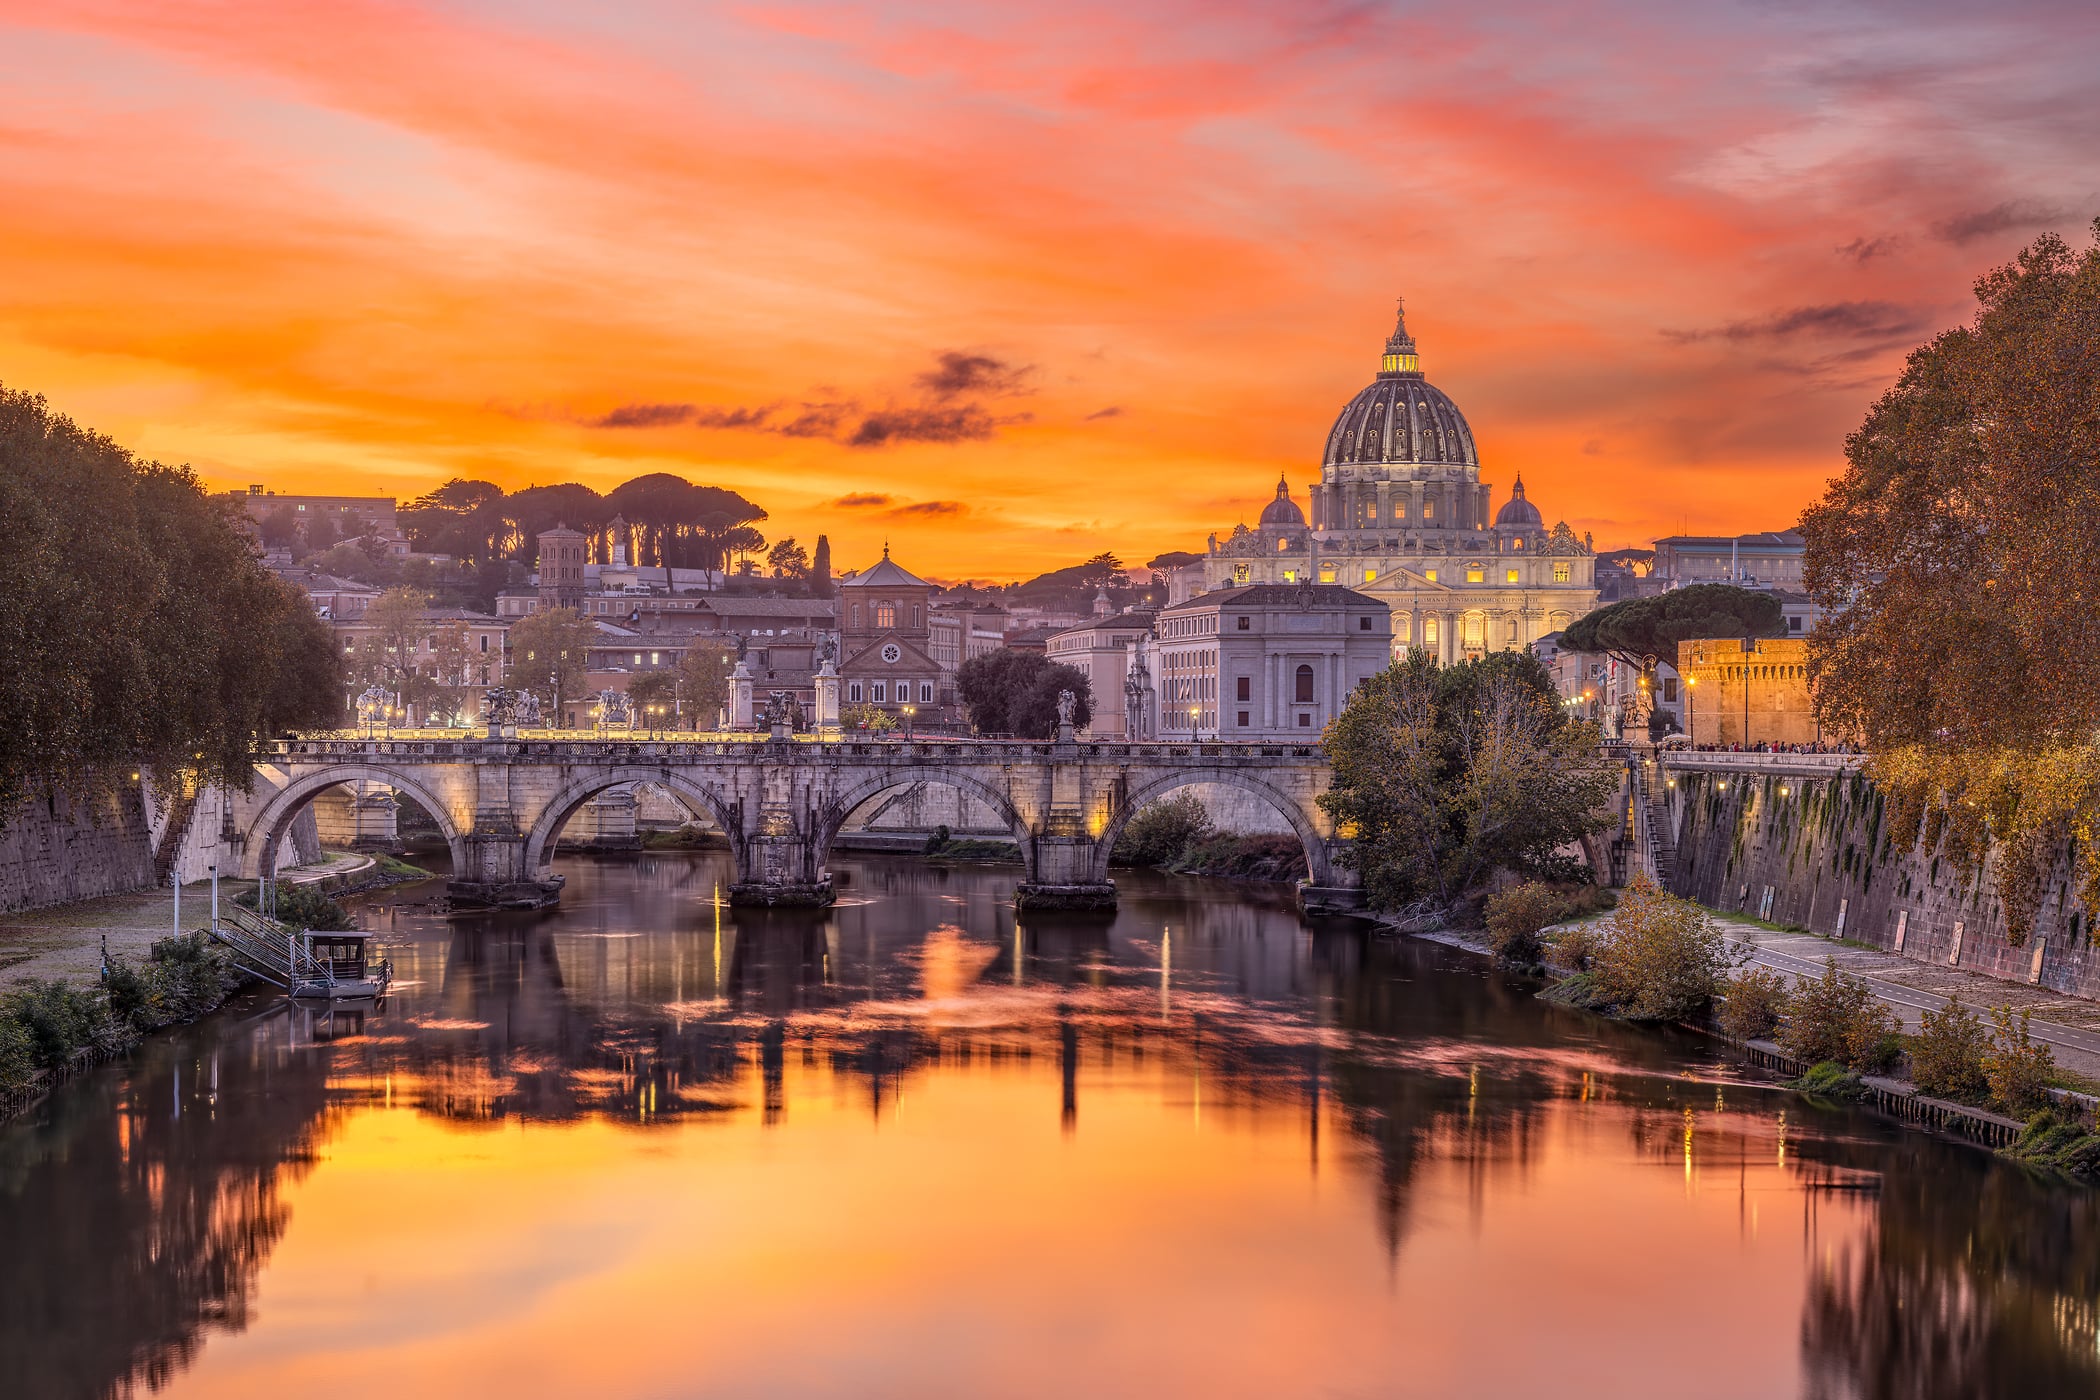 305 megapixels! A very high resolution, large-format VAST photo print of St. Peter’s Basilica, the St. Angelo Bridge, and the Tiber River at sunset; fine art photograph created by Tim Lo Monaco from Ponte Umberto I in Rome, Italy.